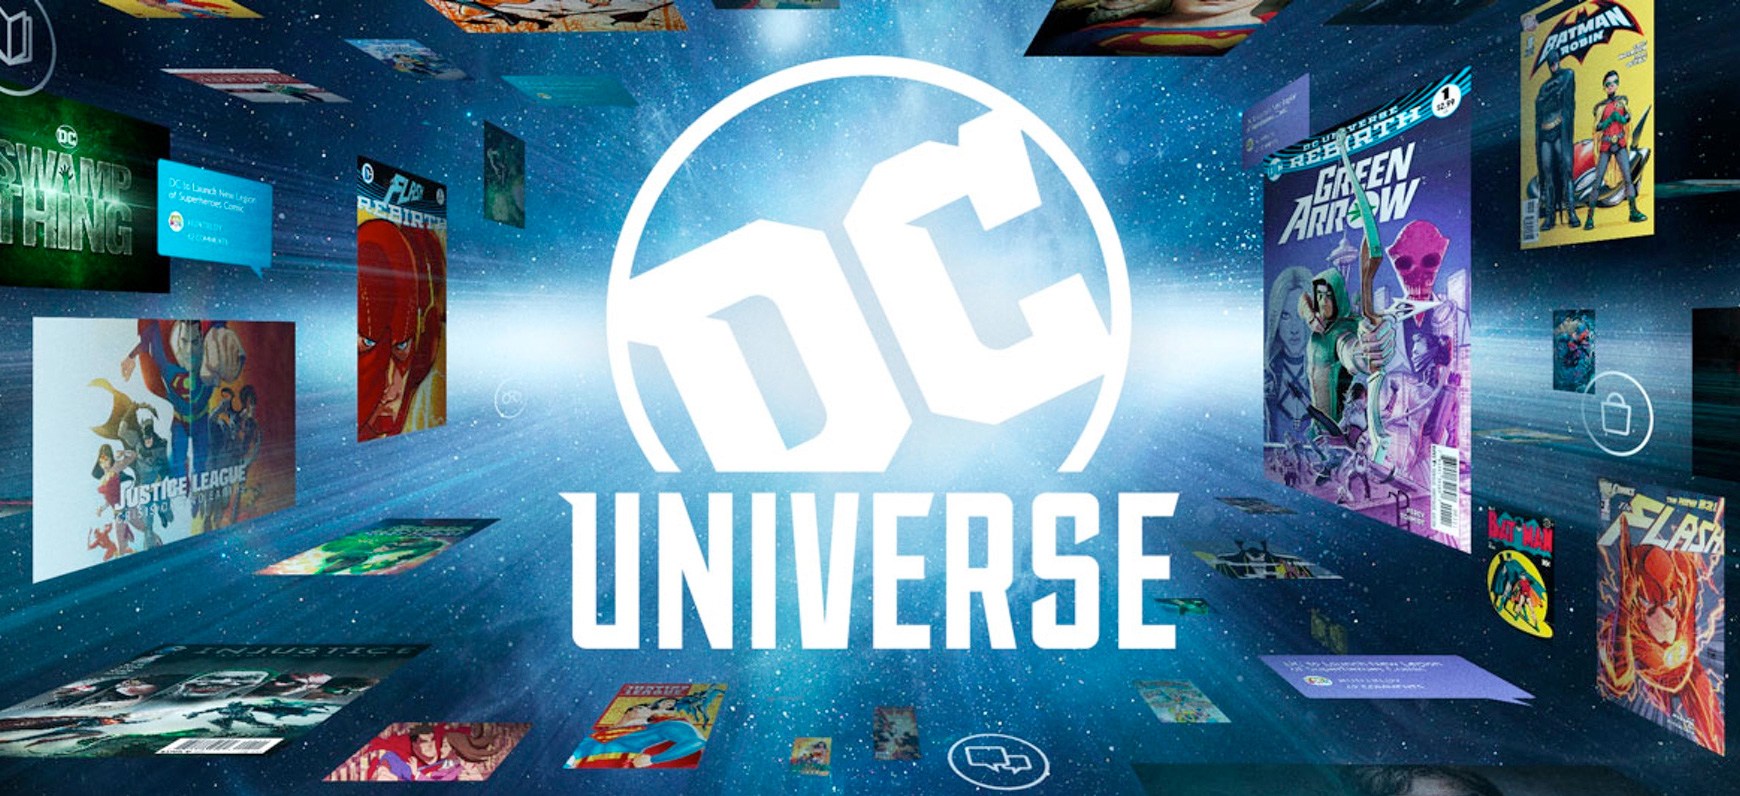 DC Universe is Offering an HBO Max Add-On Deal for $4.99/Month